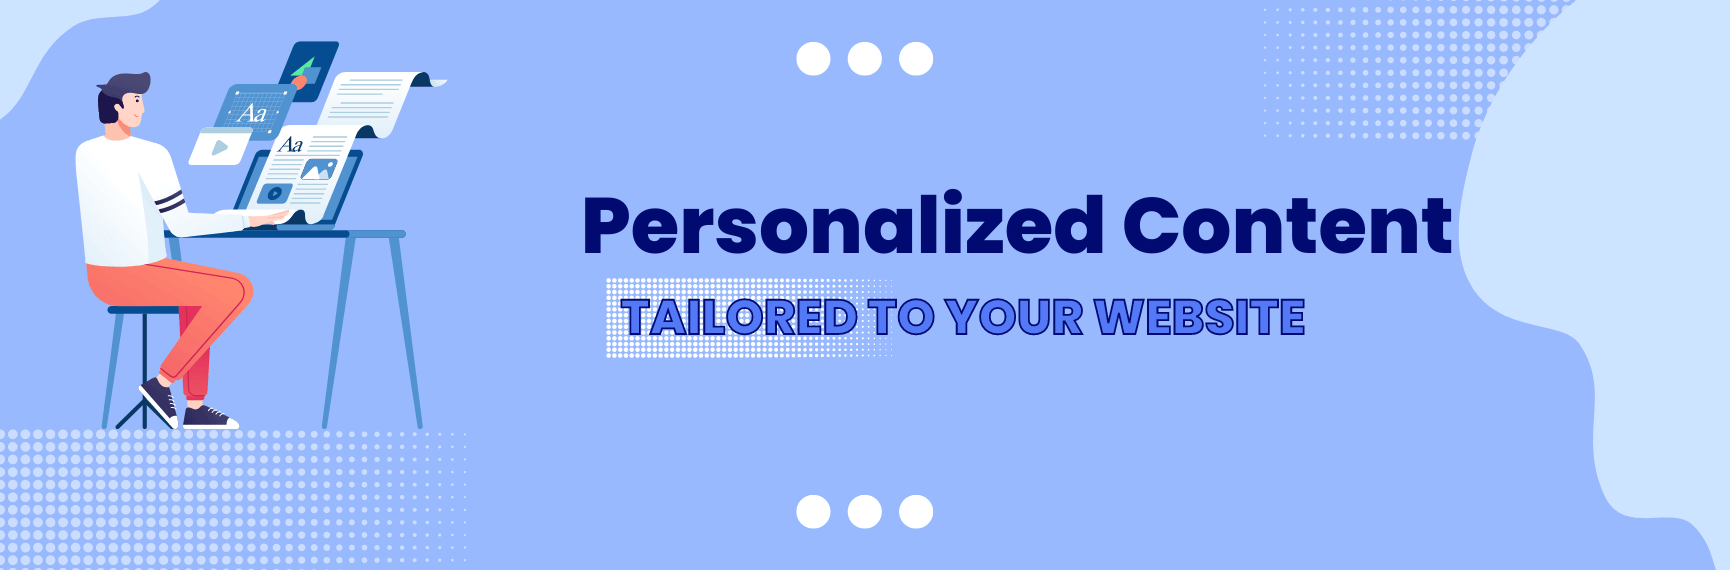 personalized web contents